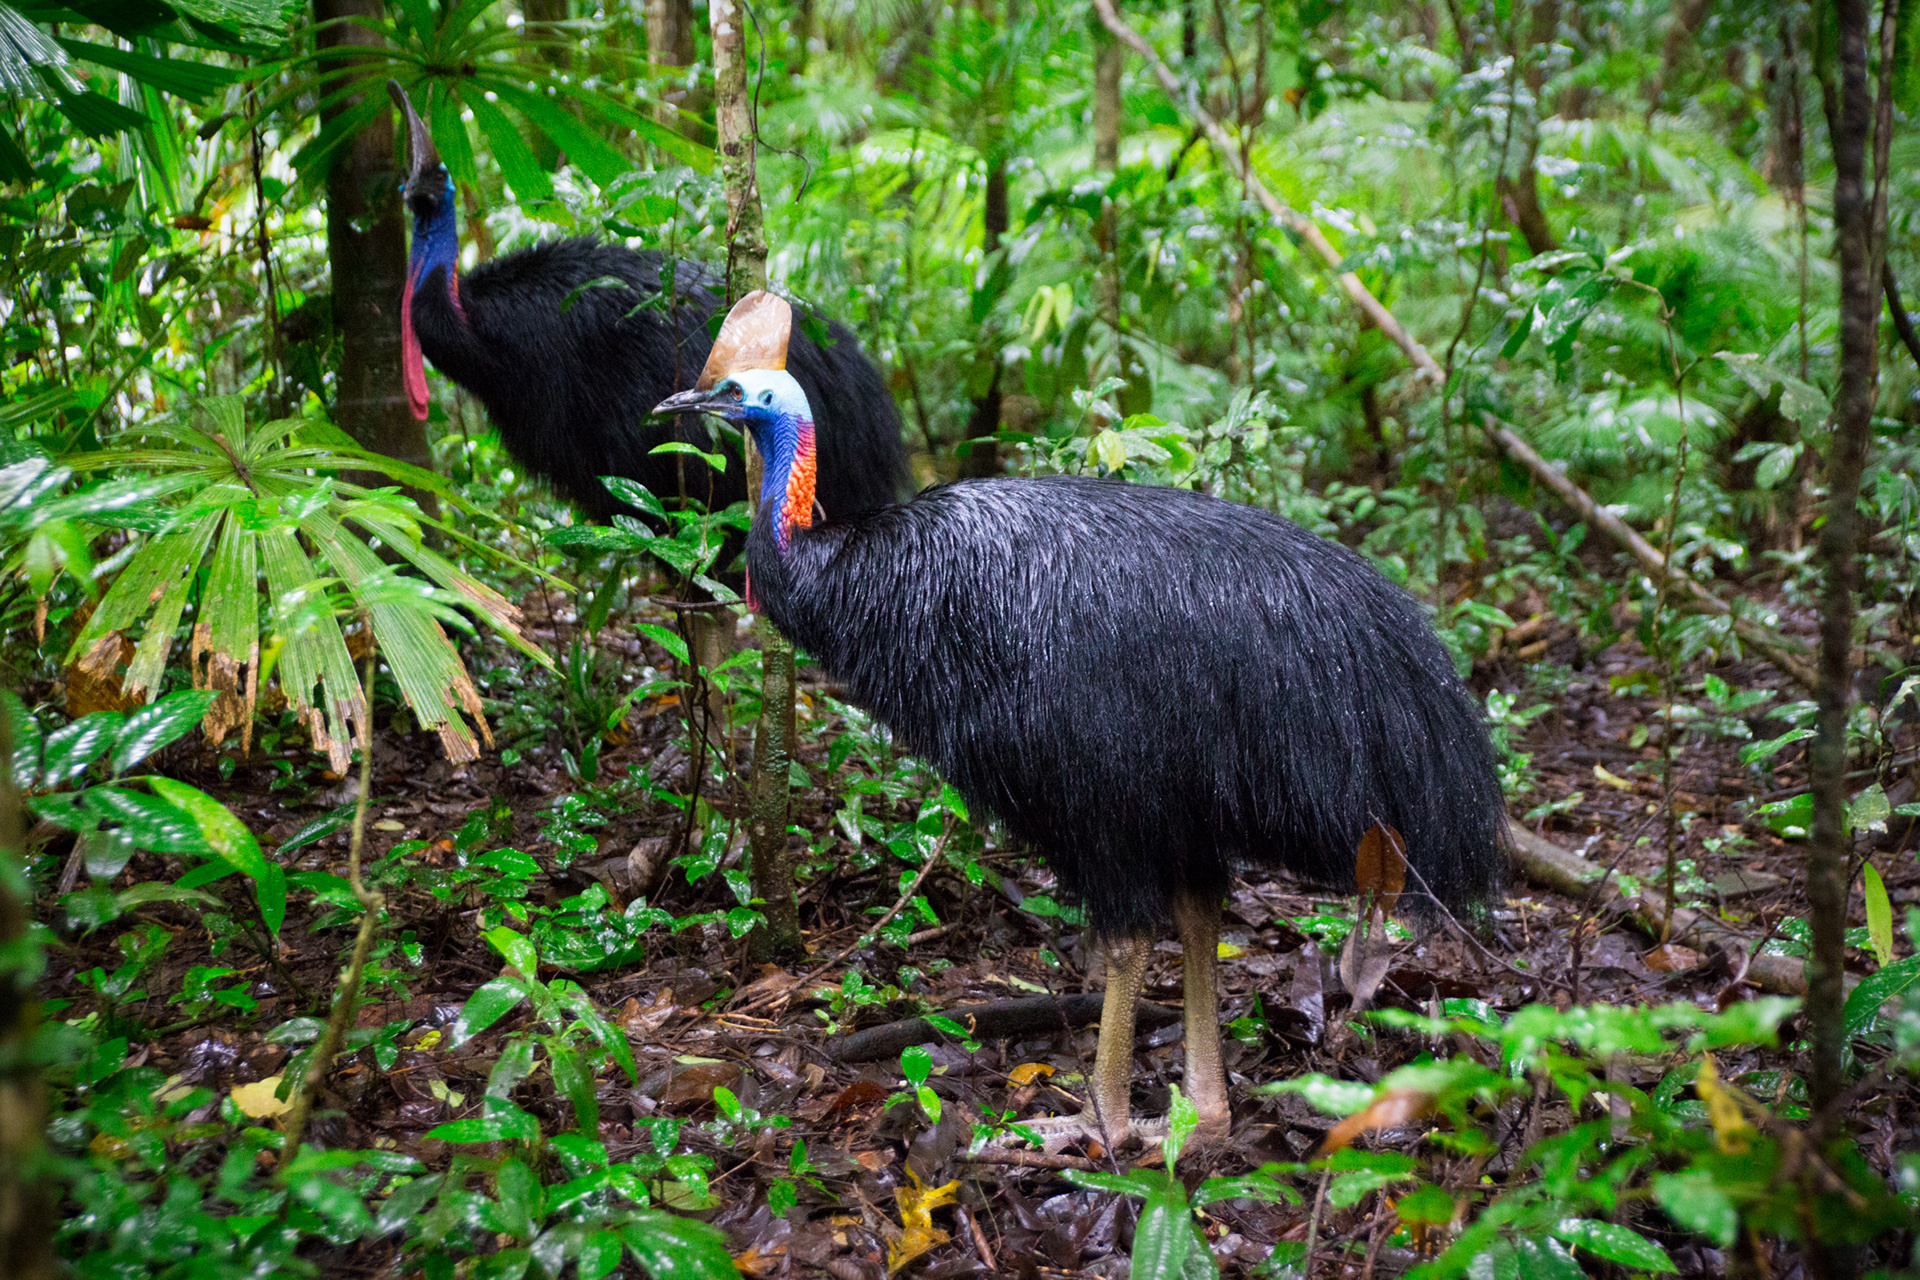 Save the cassowary campaign, Frequently asked questions, Rainforest protection initiative, Conservation efforts, 1920x1280 HD Desktop